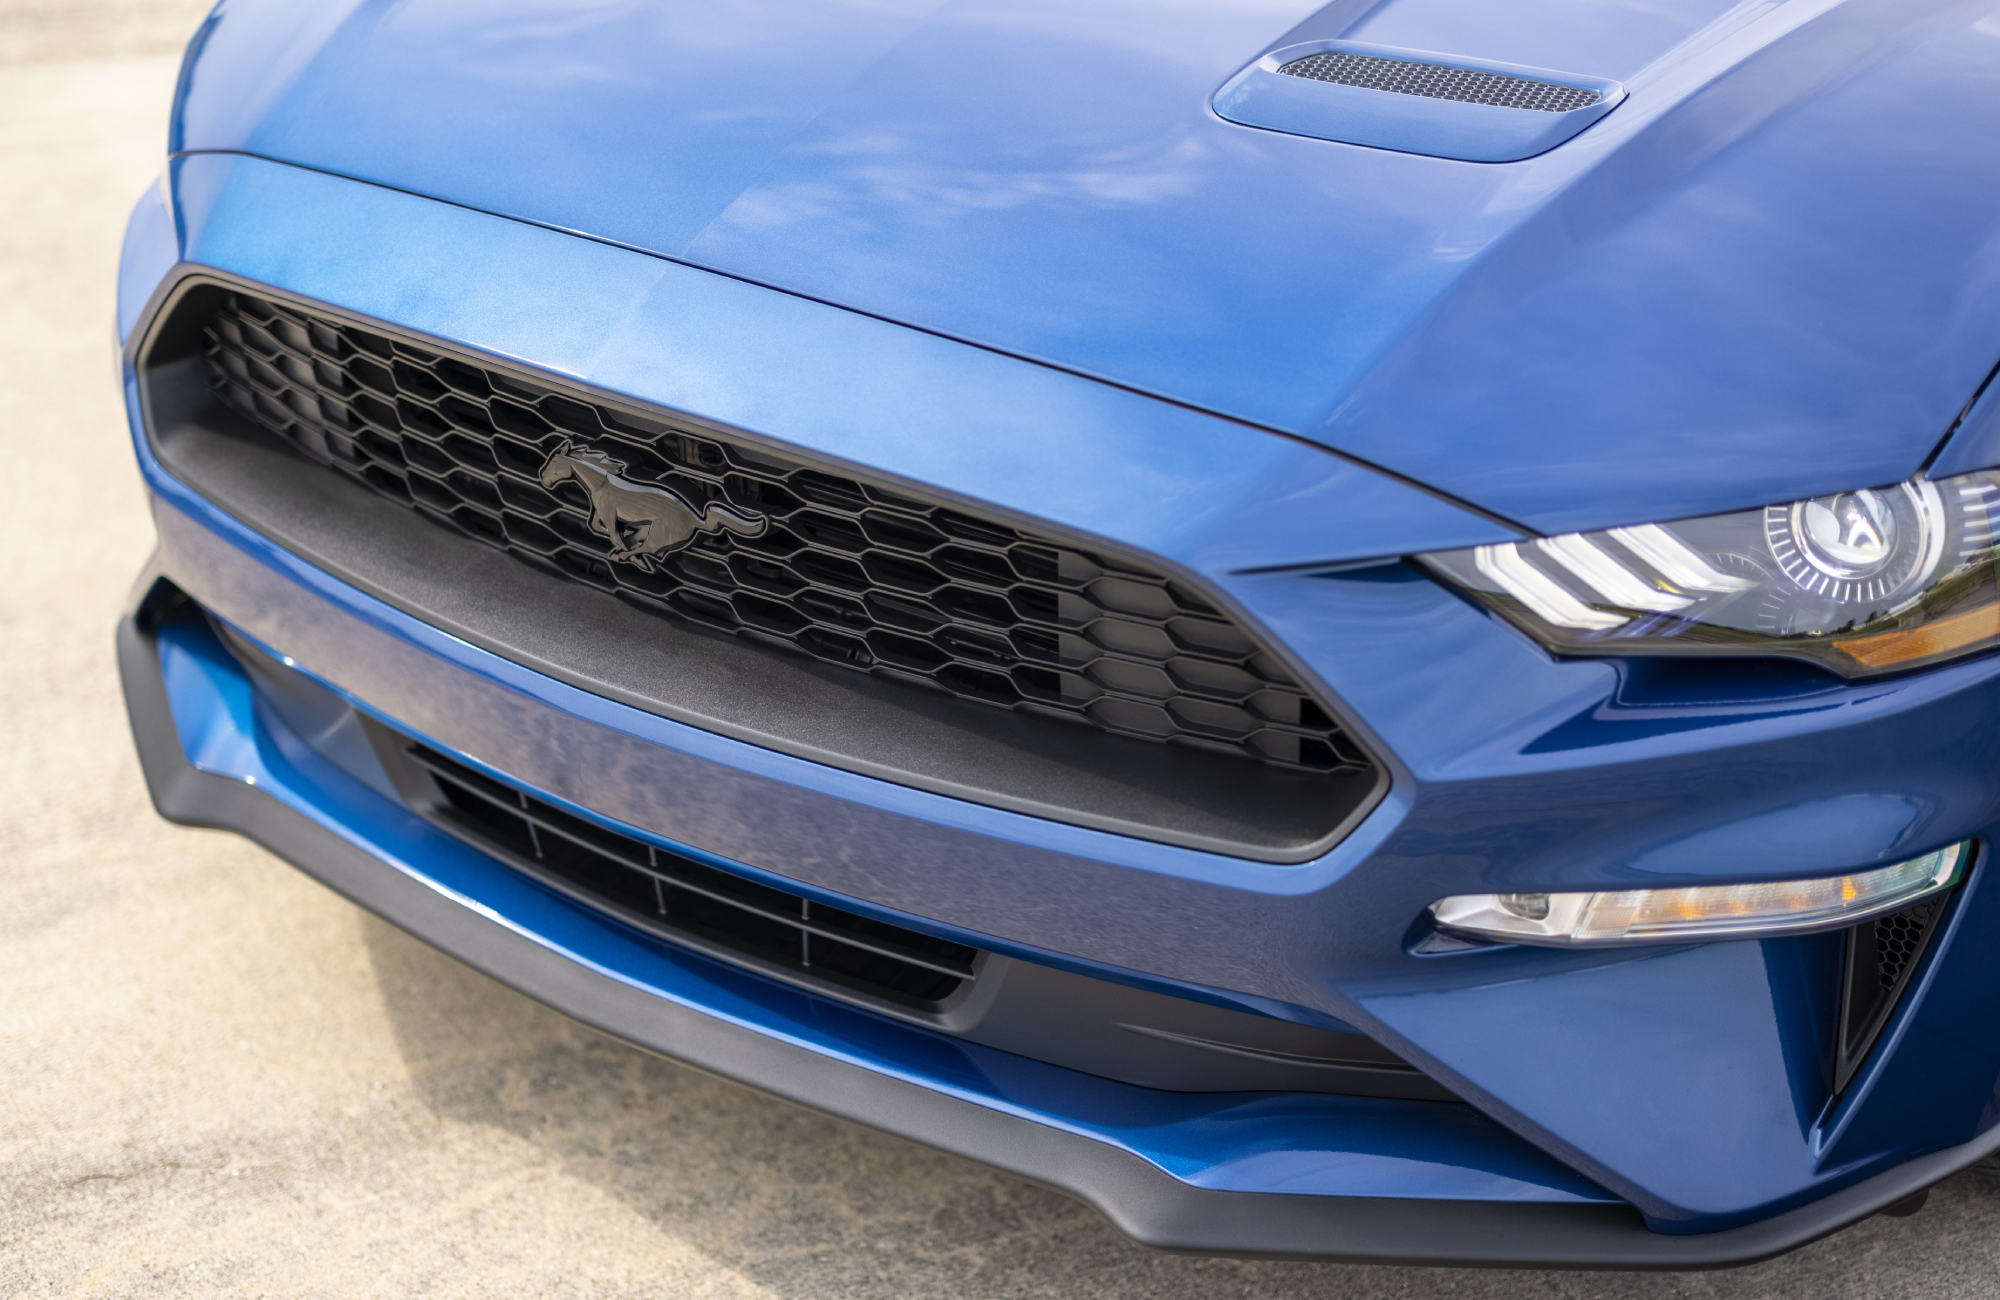 2022 Ford Mustang Stealth Edition - 2022 Ford Mustang Stealth Edition